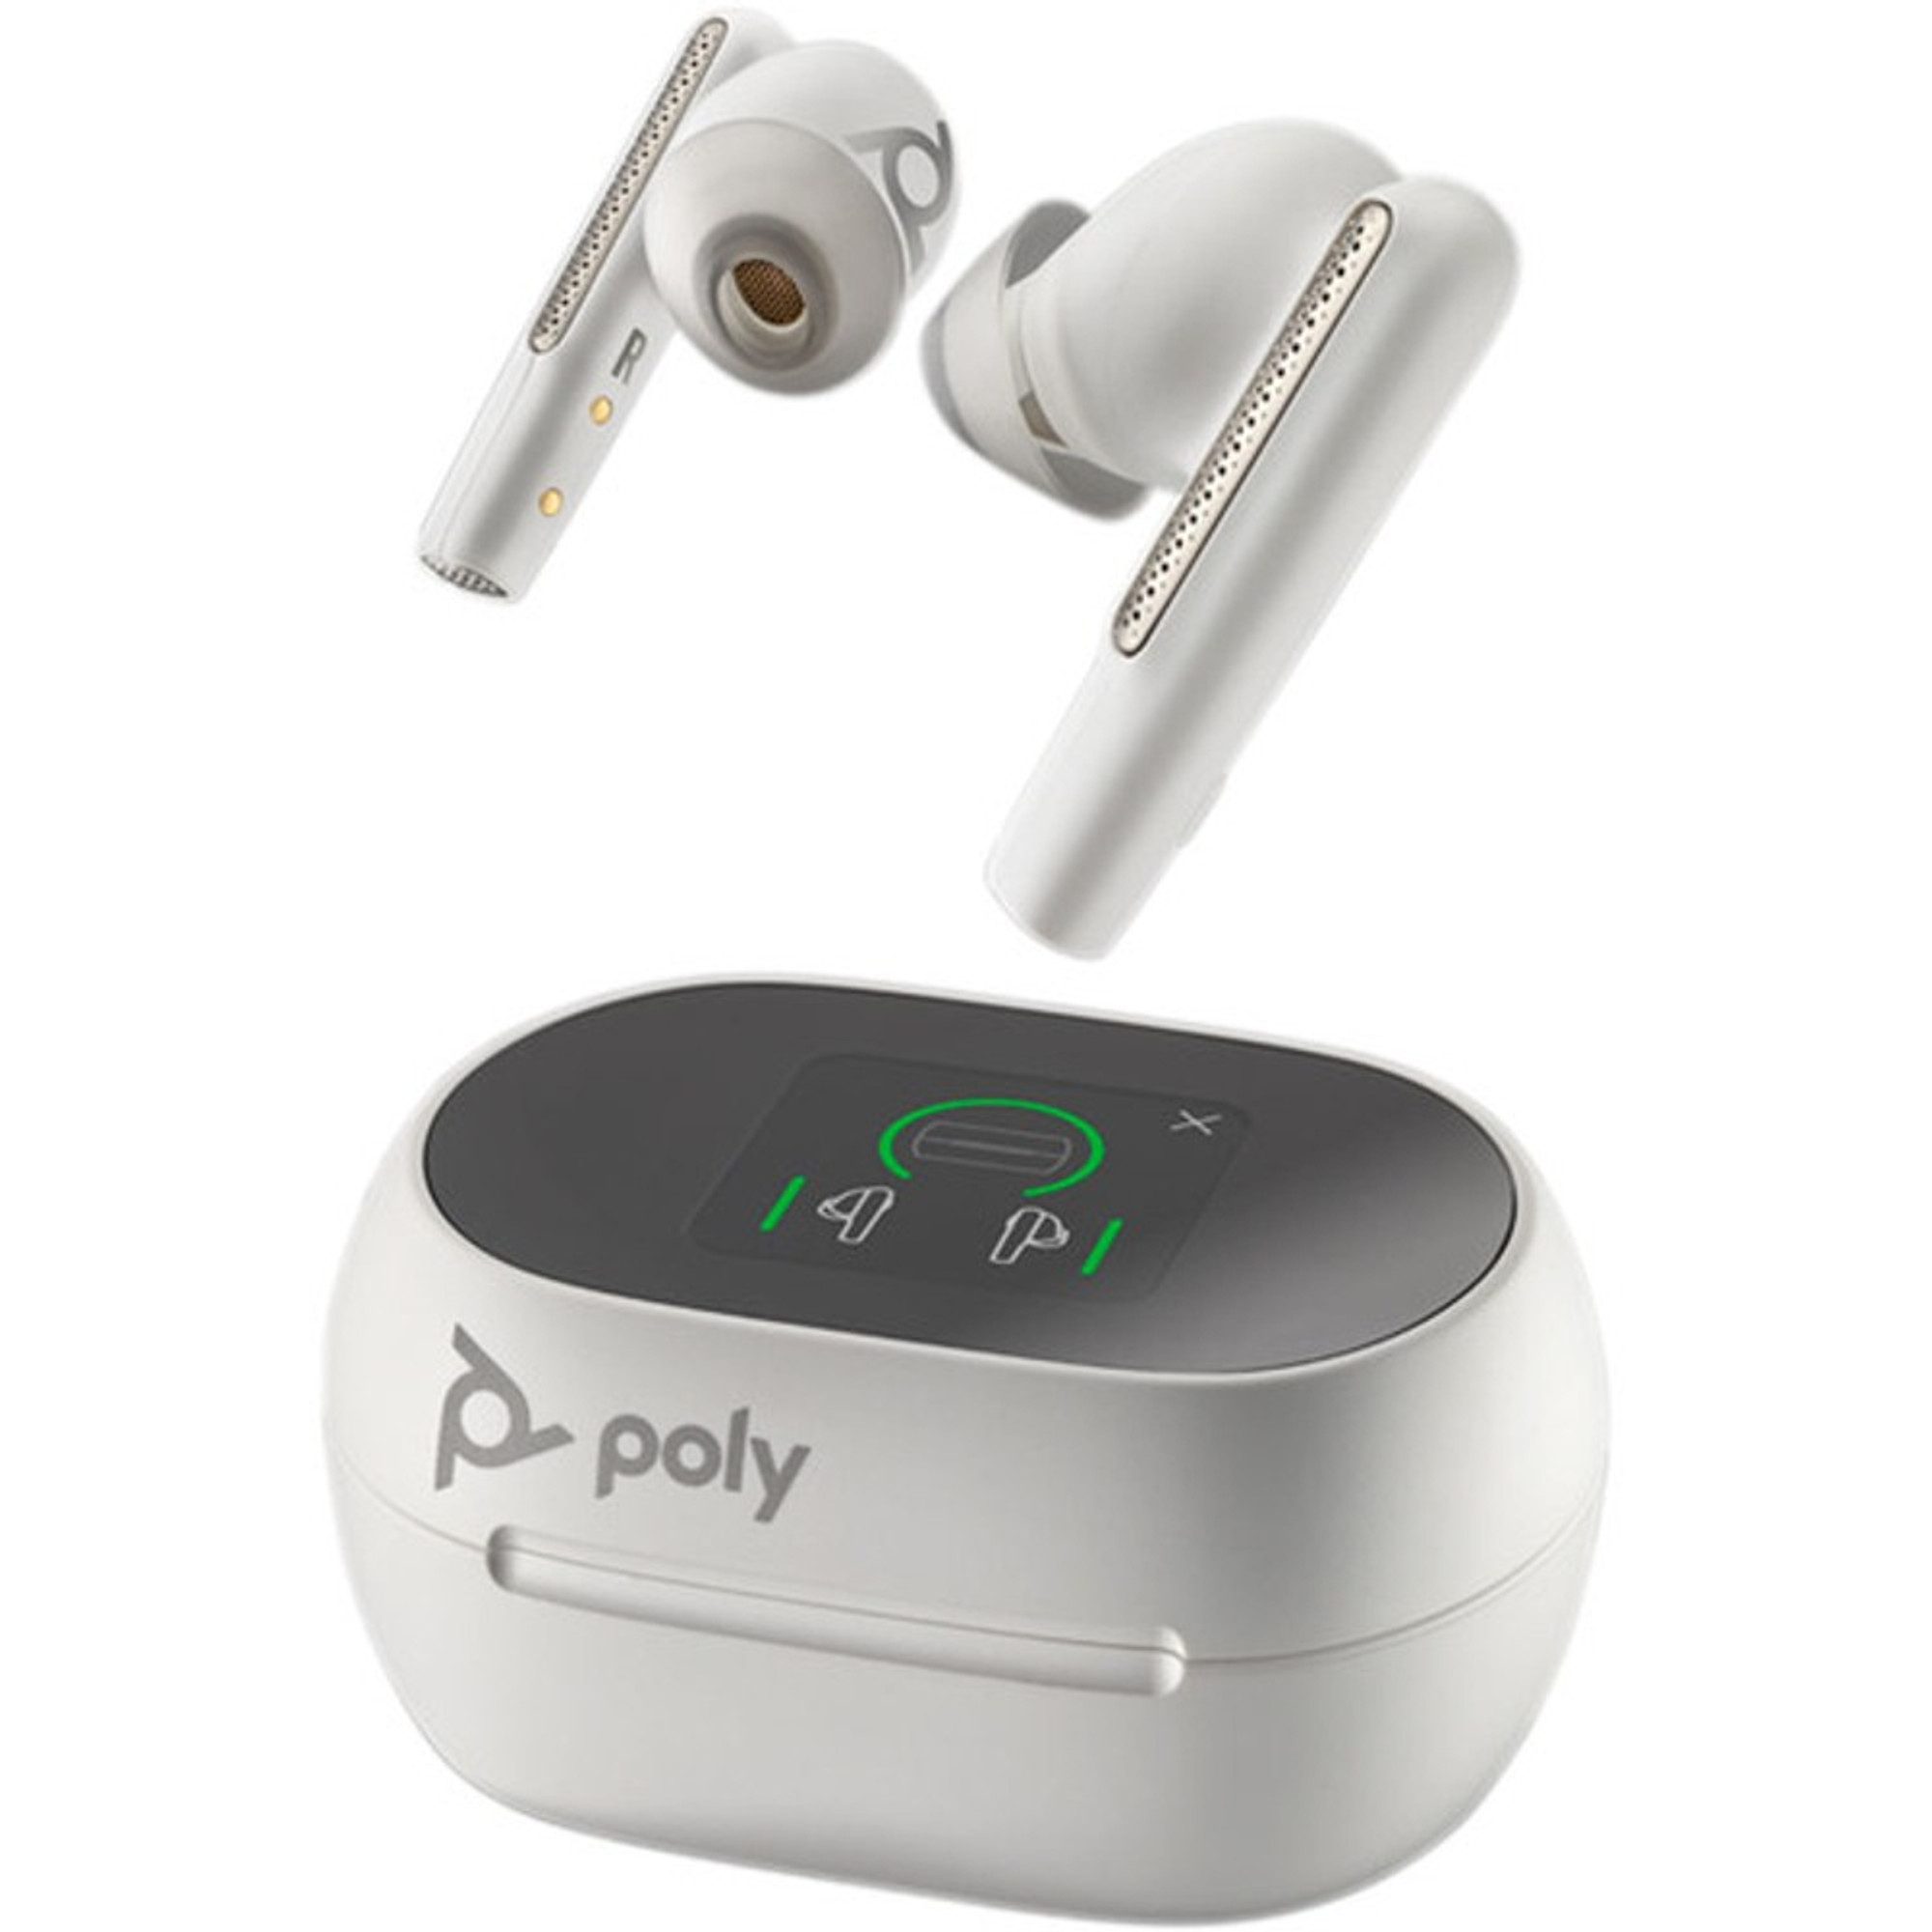 Poly Plantronics Singapore | 60+ Poly Headsets With Poly Plantronics Case (White) Free | HEADPHONES Voyager Charging Earbuds Poly Wireless (216754-01 Plantronics USB-A, 7Y8G5AA) UC Plantronics 60+ True / Free Touchscreen | | Voyager